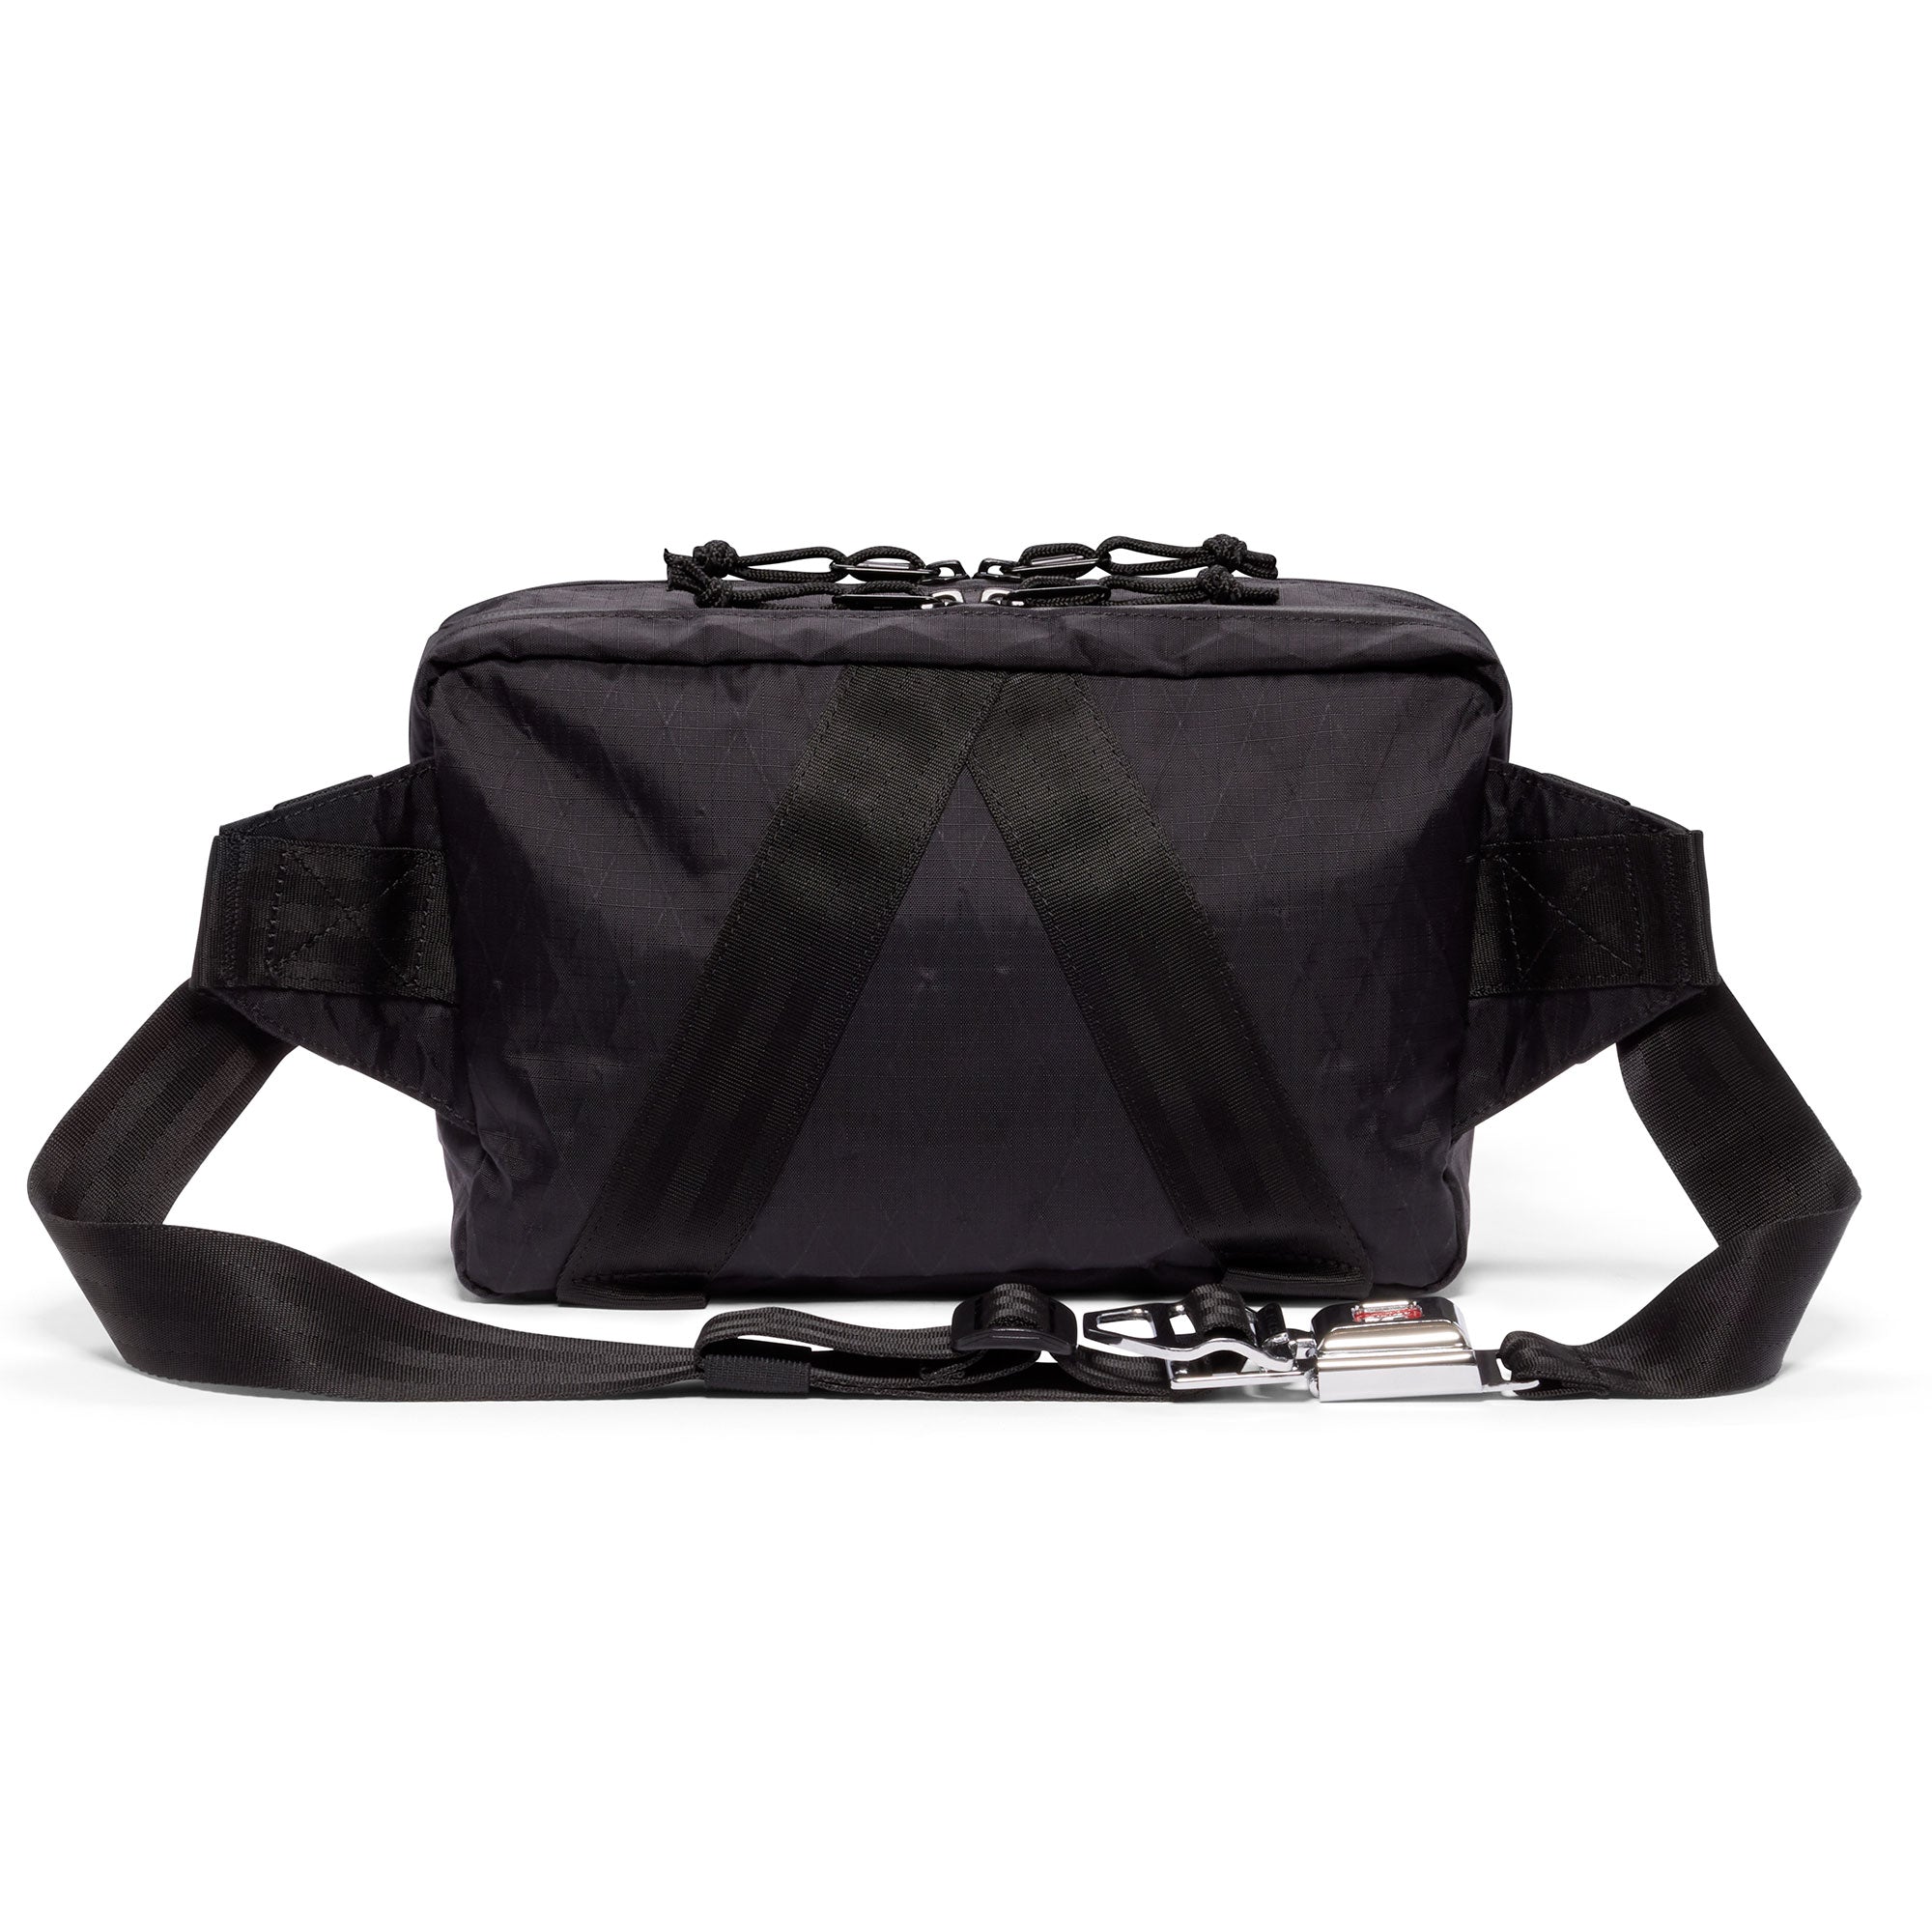 Tensile Sling bag in black x fabric back view #color_black x